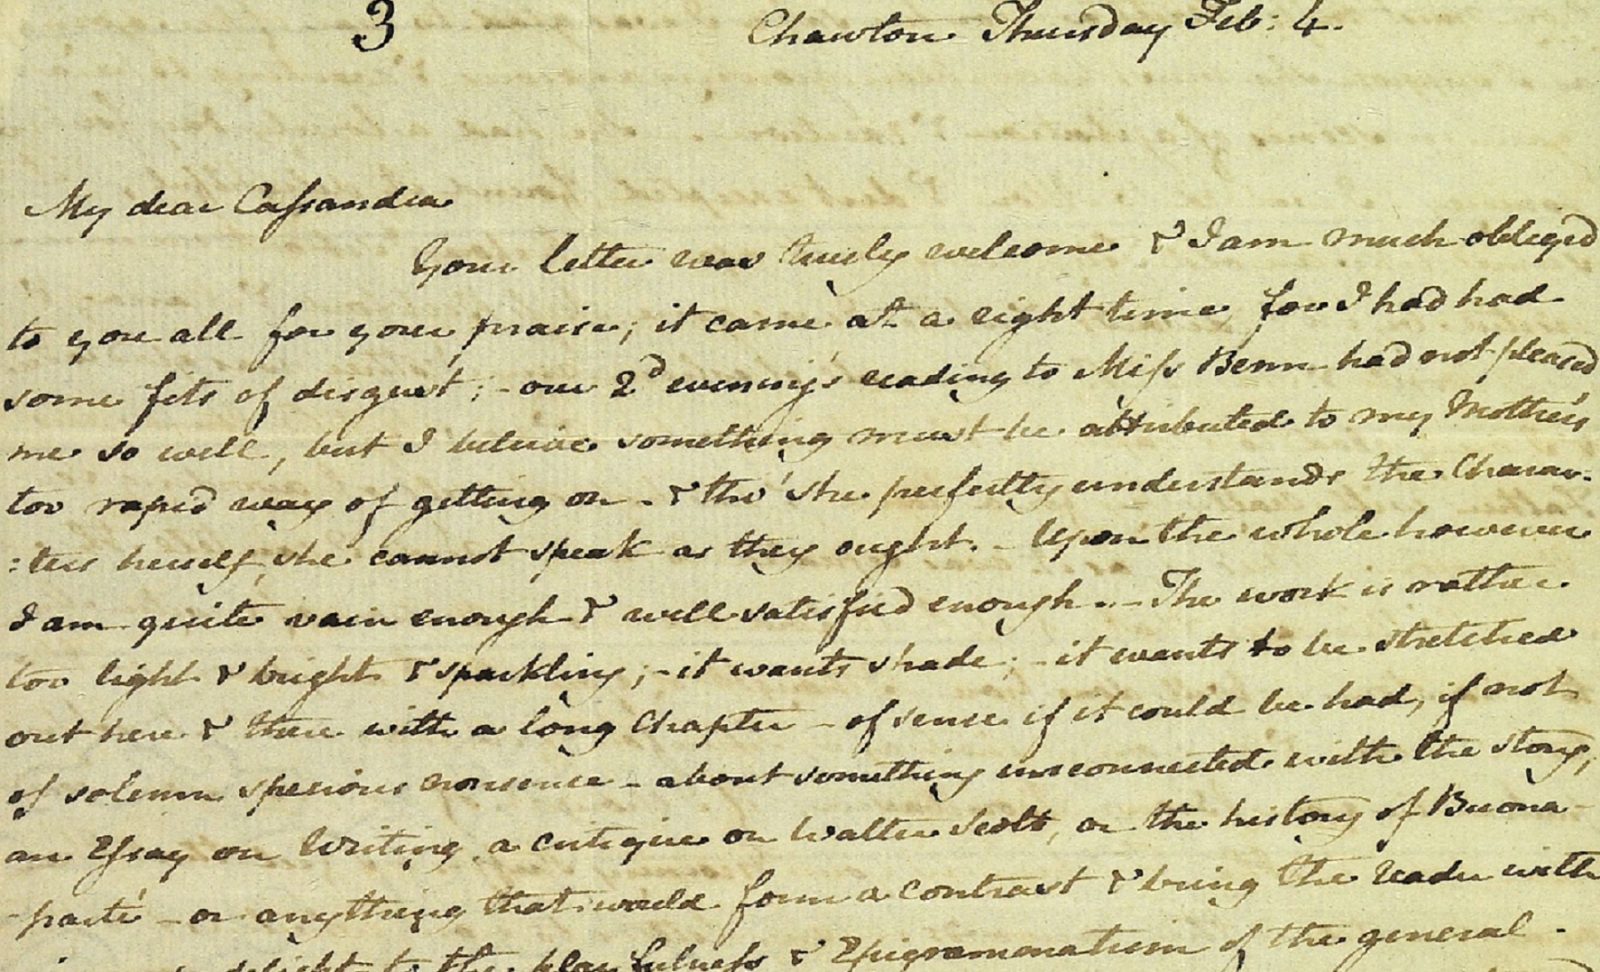 Extract of a letter from Jane Austen to Cassandra Austen, 4 February 1813